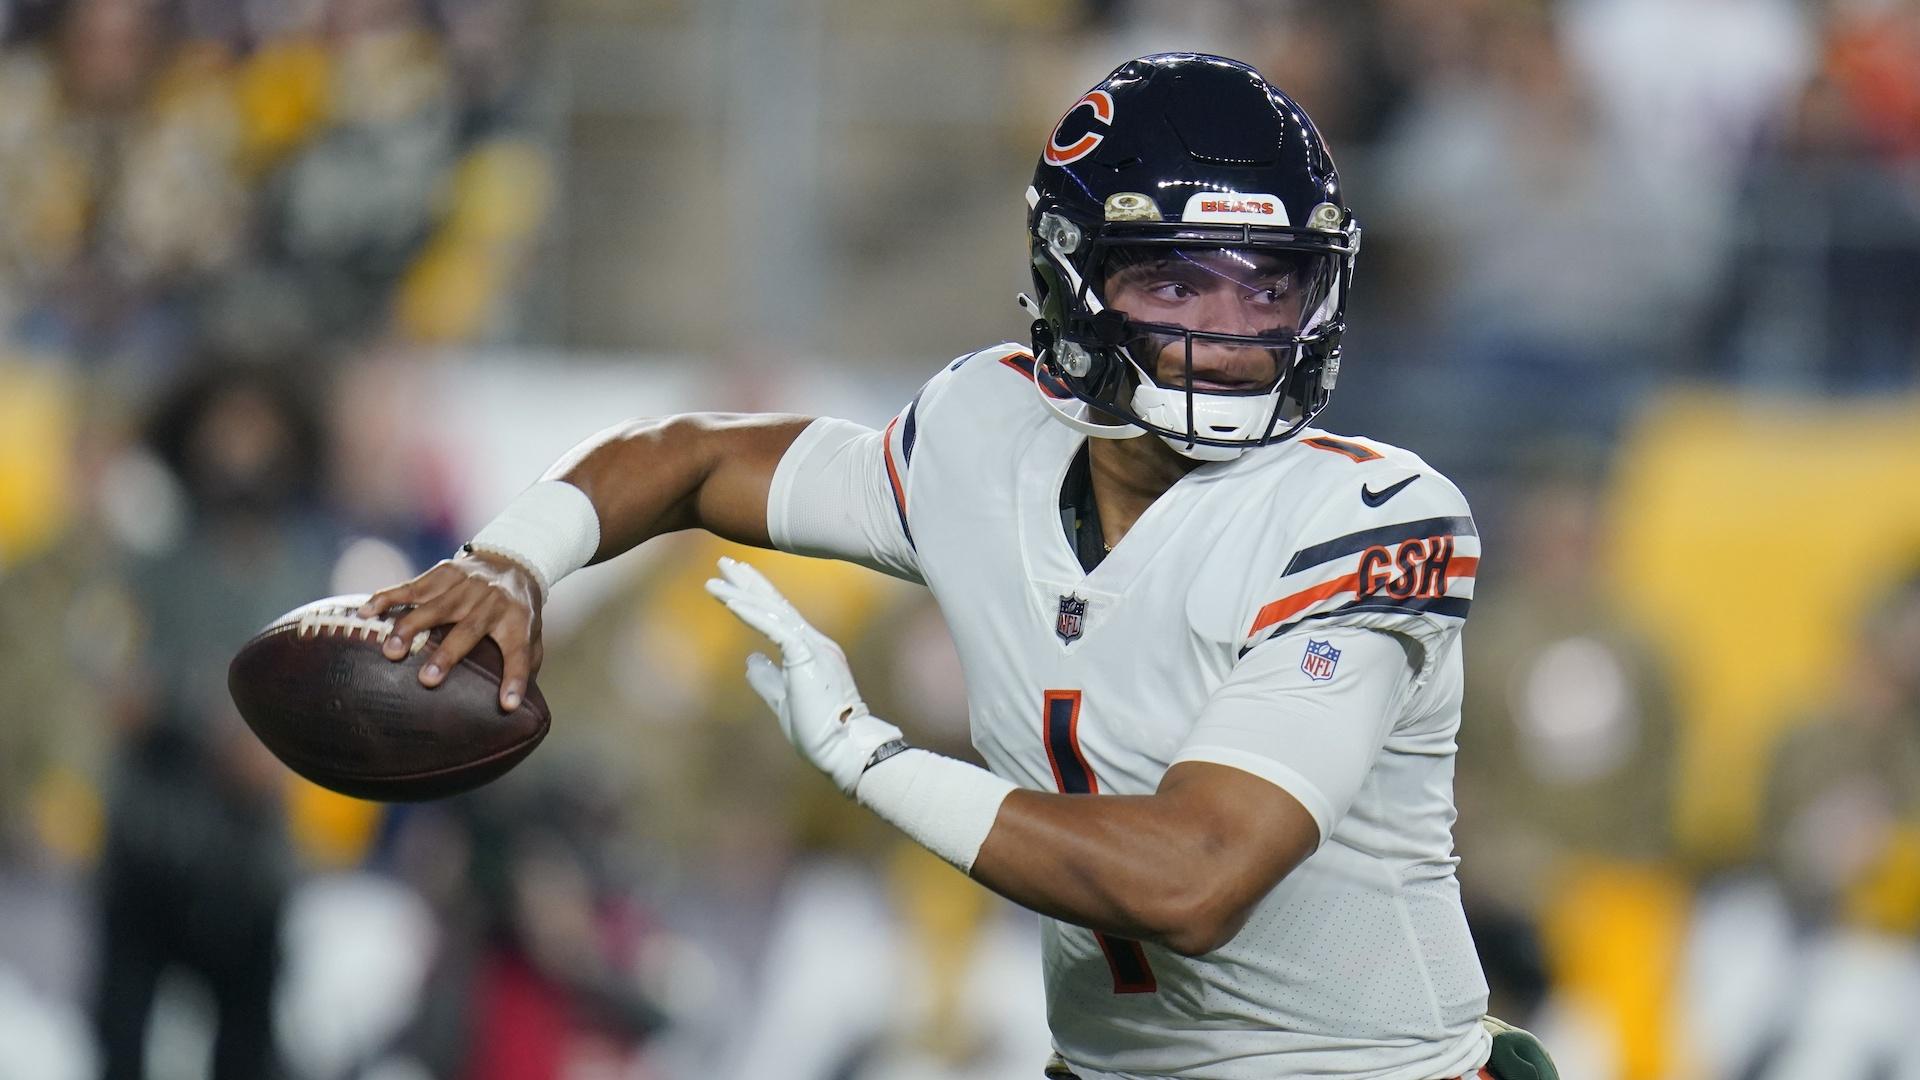 Bears Rookie QB Fields Nearly Has His Moment vs Steelers